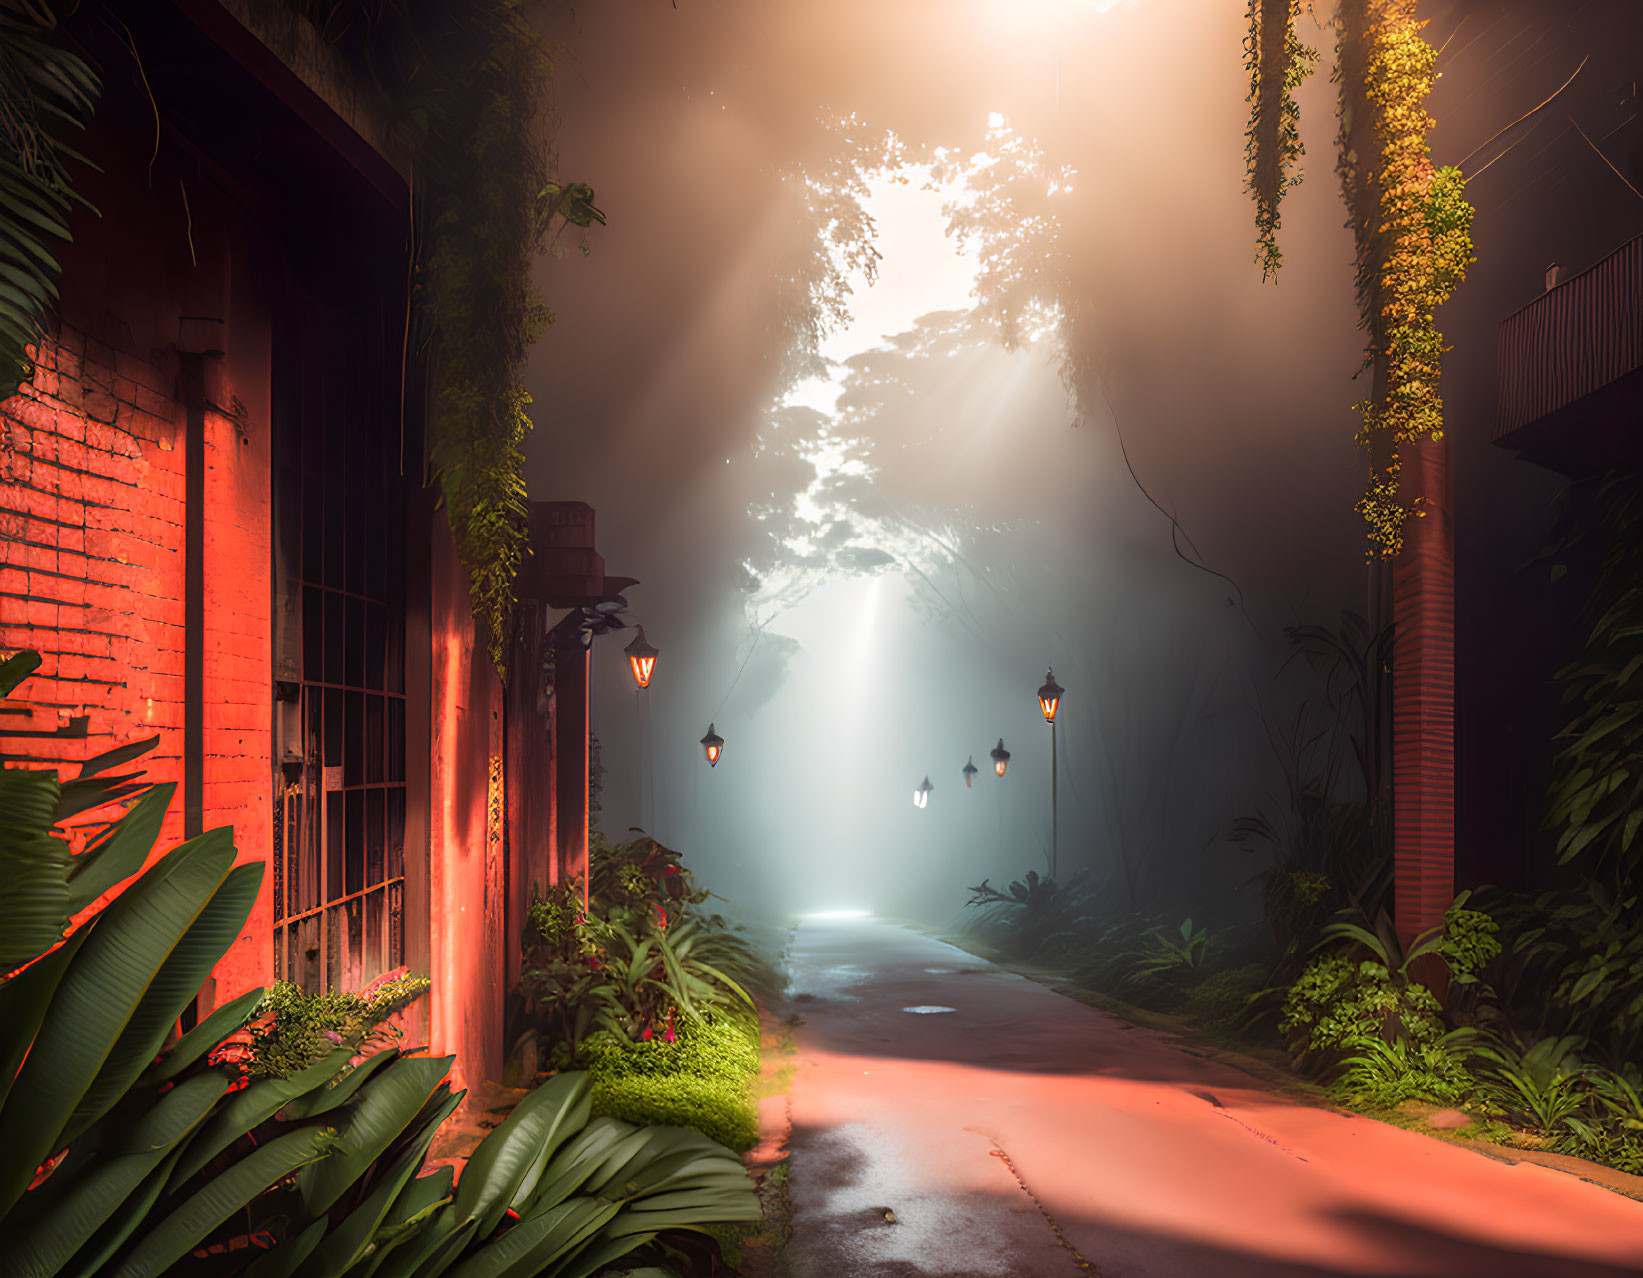 Mystical alley with lanterns, greenery, and brick walls